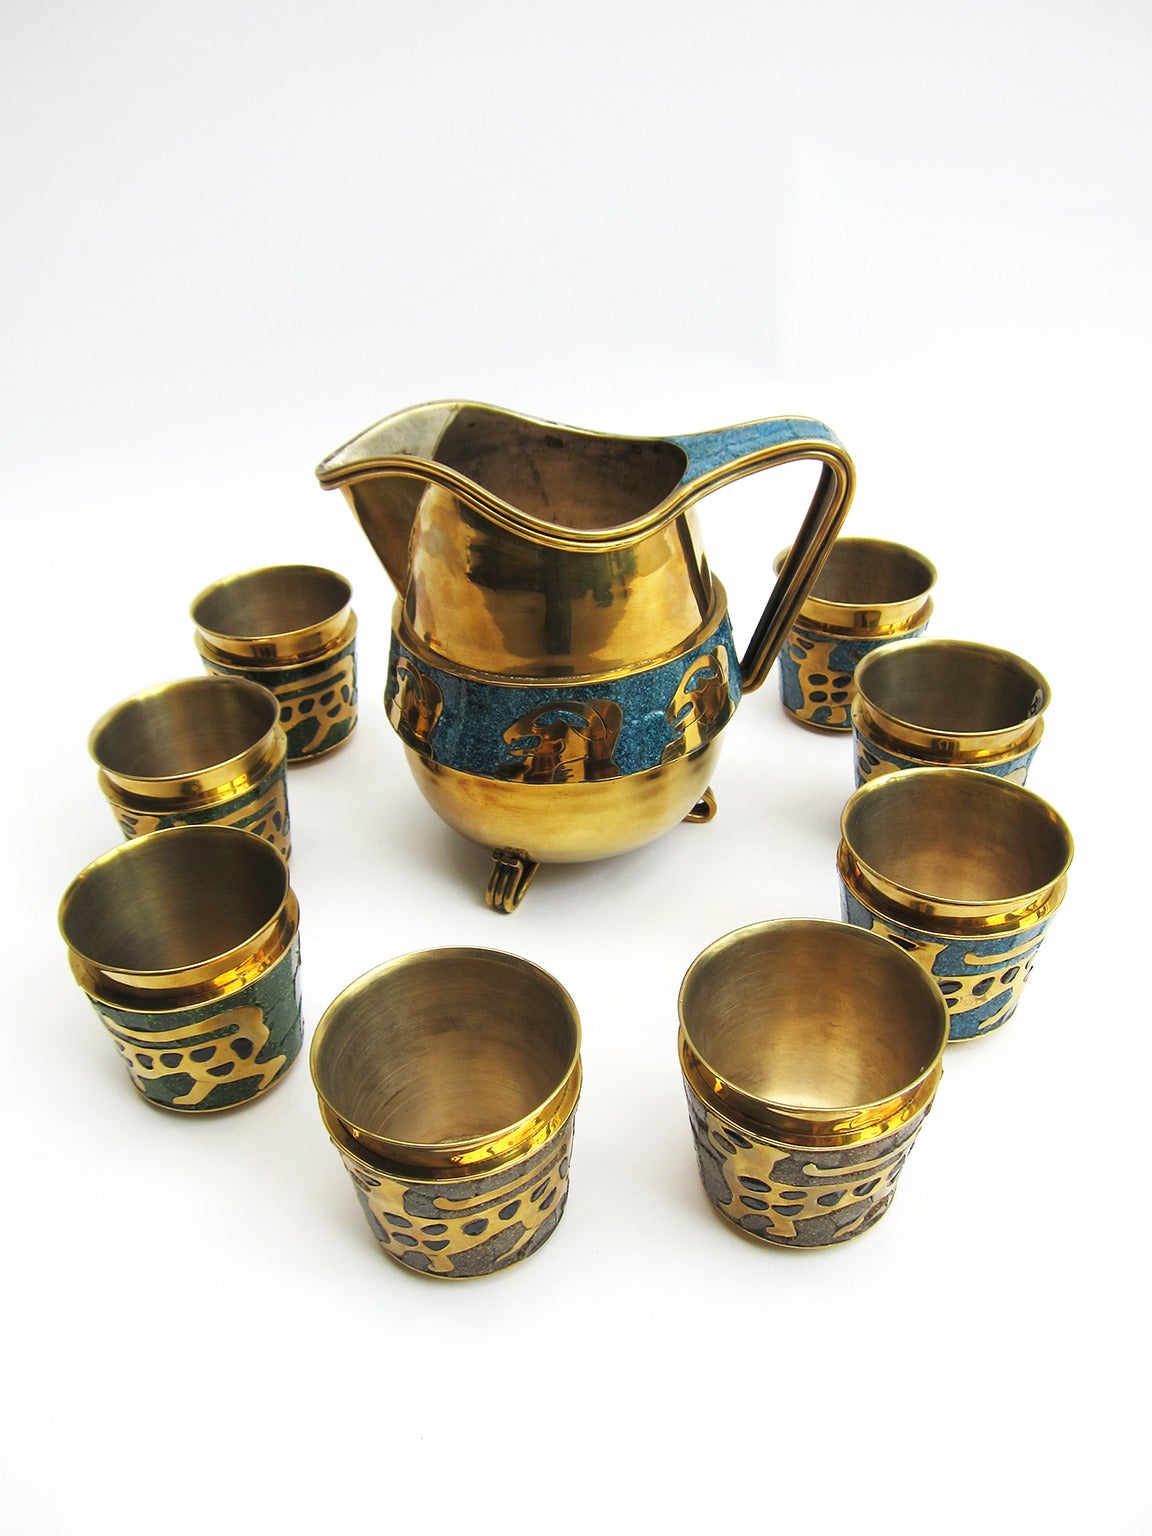 Salvador Vaca Teran was an outstanding designer and silversmith. After leaving the Spratling workshop he joined his cousins, Los Castillo brothers where he worked under the Castillo name for 13 years. In 1952, he went on his own with 23 silversmiths